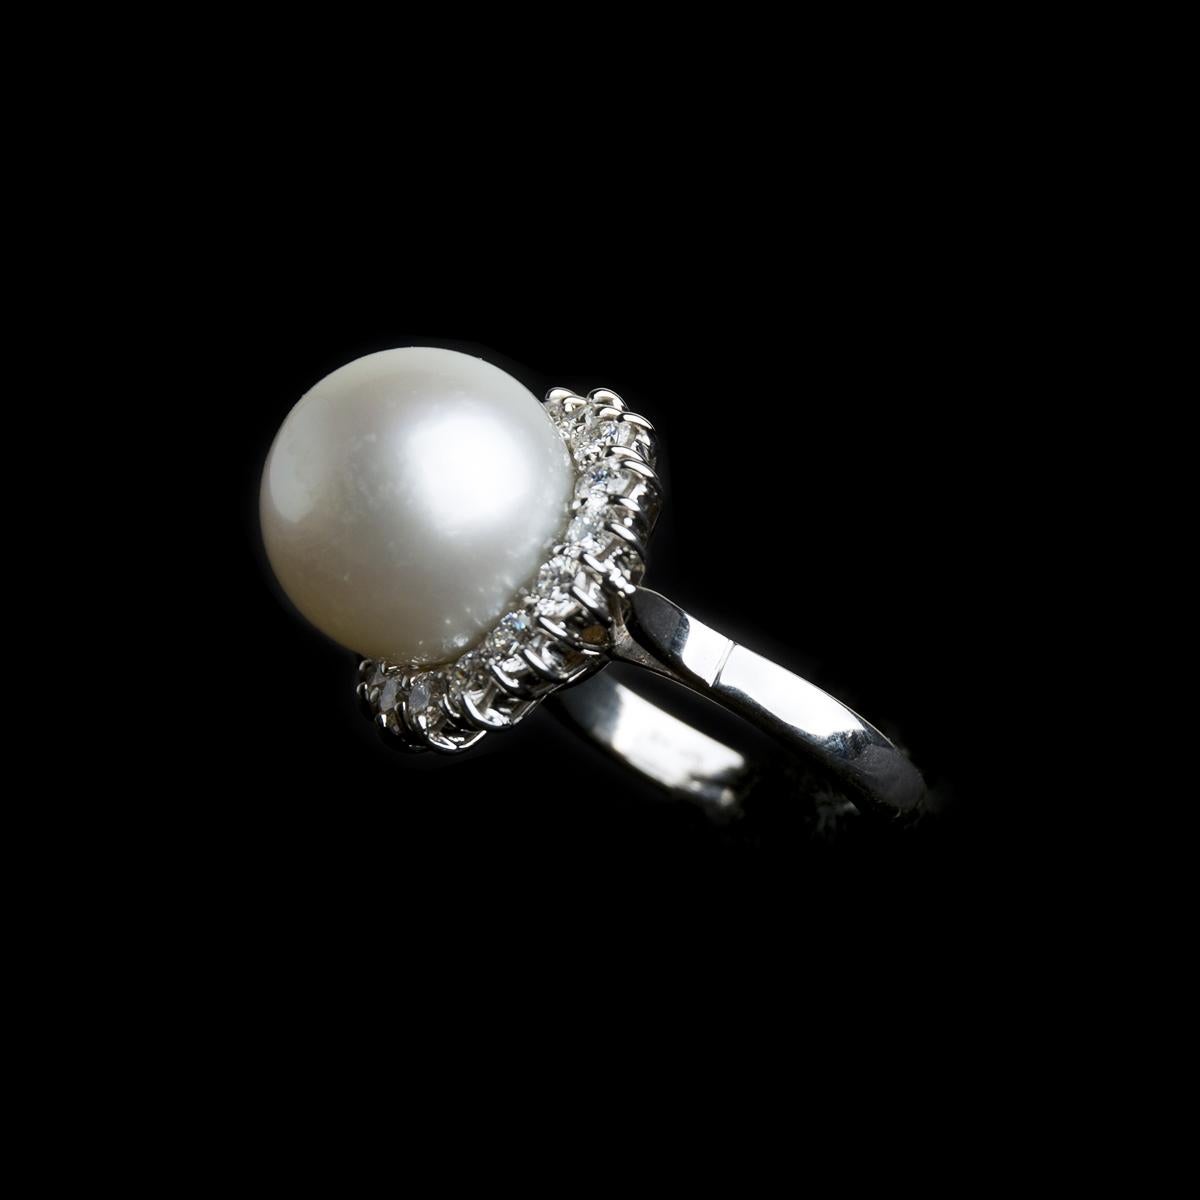 Brilliant Cut Handmade 18 Kt White Gold Ring with Australian Pearl and 1.18 Ct Diamond For Sale